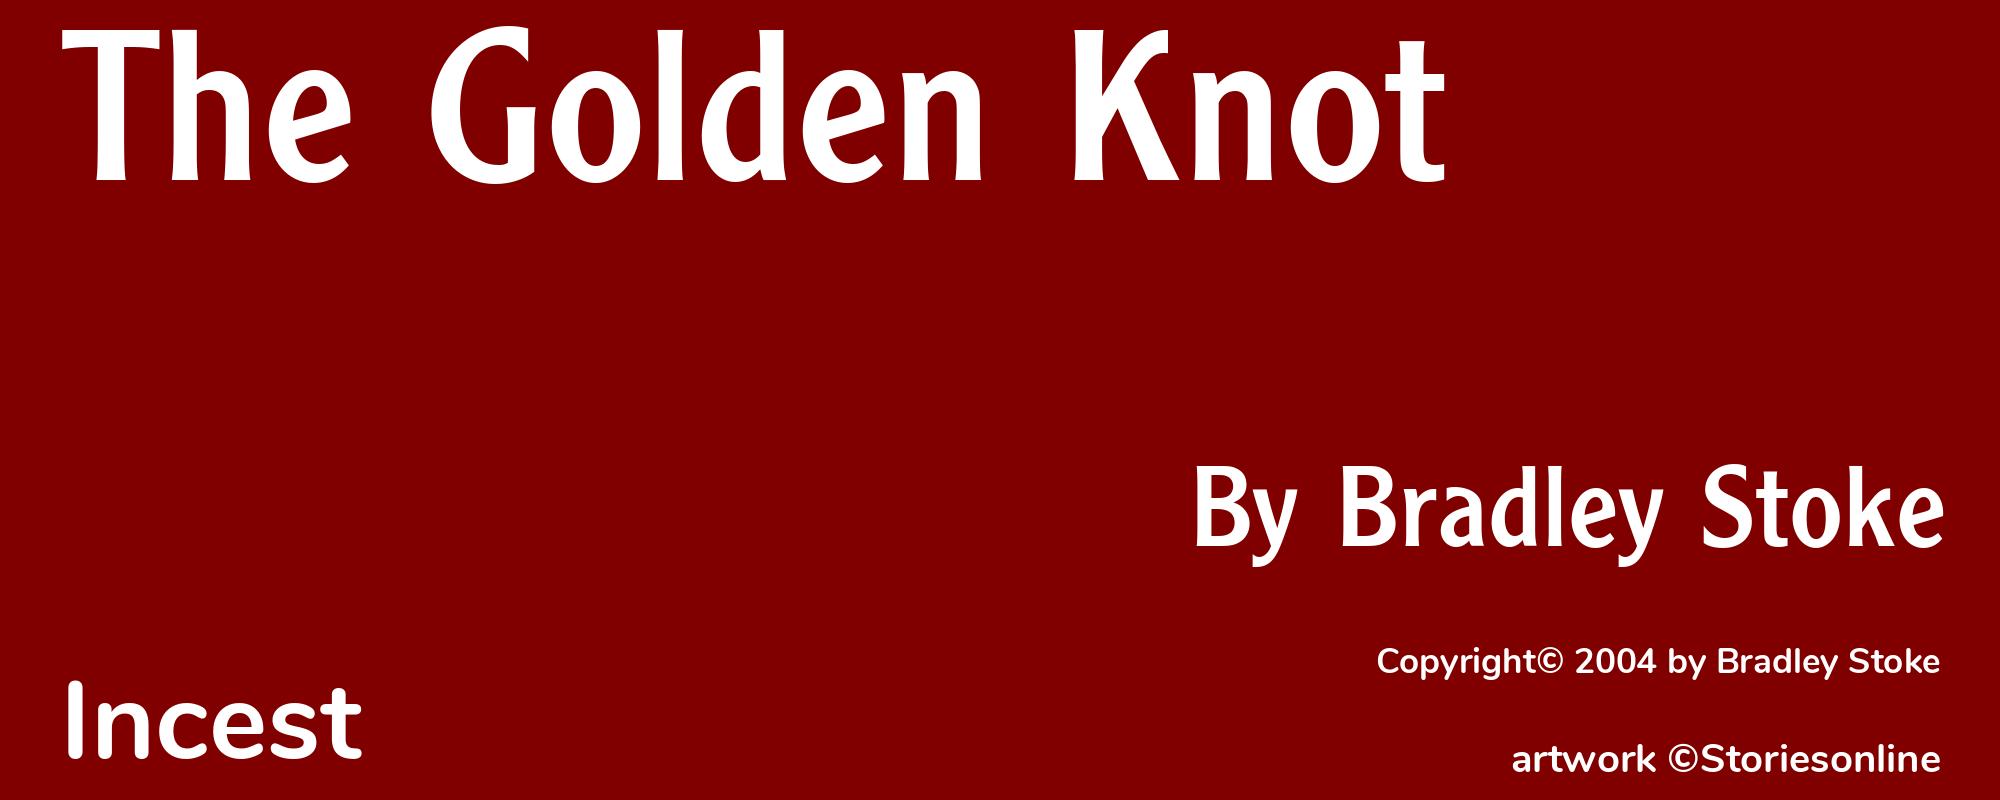 The Golden Knot - Cover